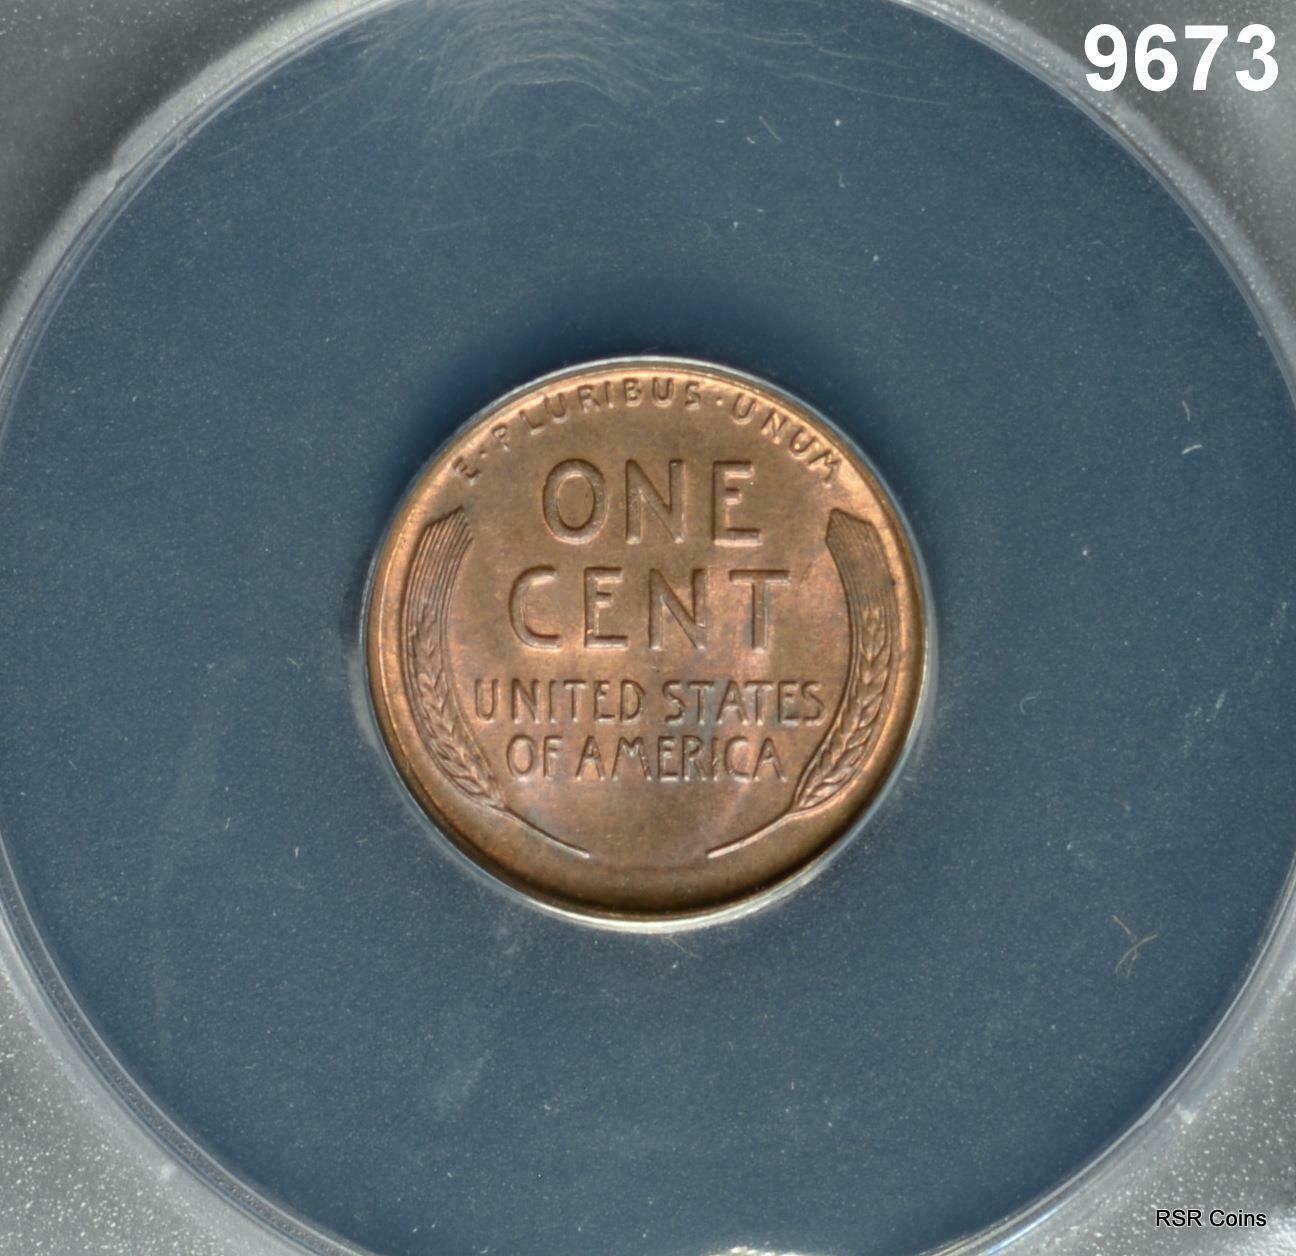 1931 S LINCOLN CENT ANACS CERTIFIED MS63 RB SEMI KEY DATE! NICE! #9673